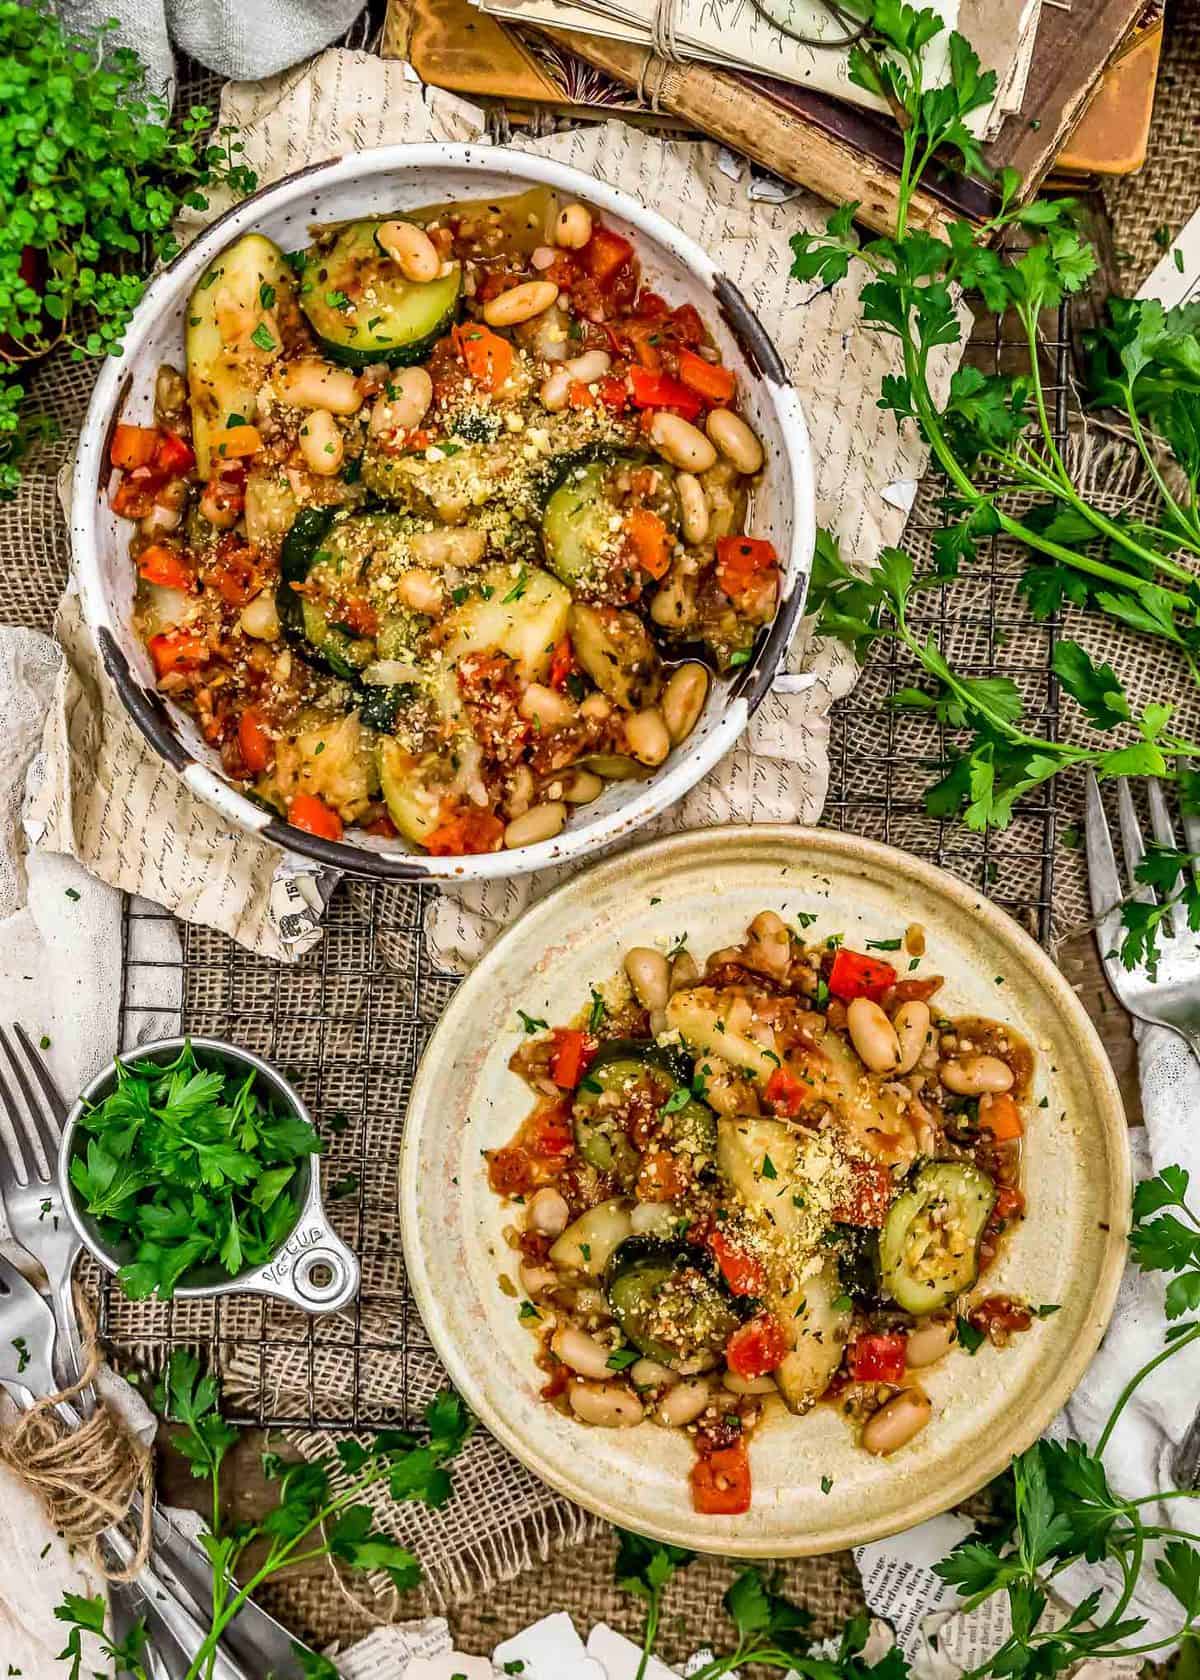 Tablescape of Rustic Italian Vegetable Bake